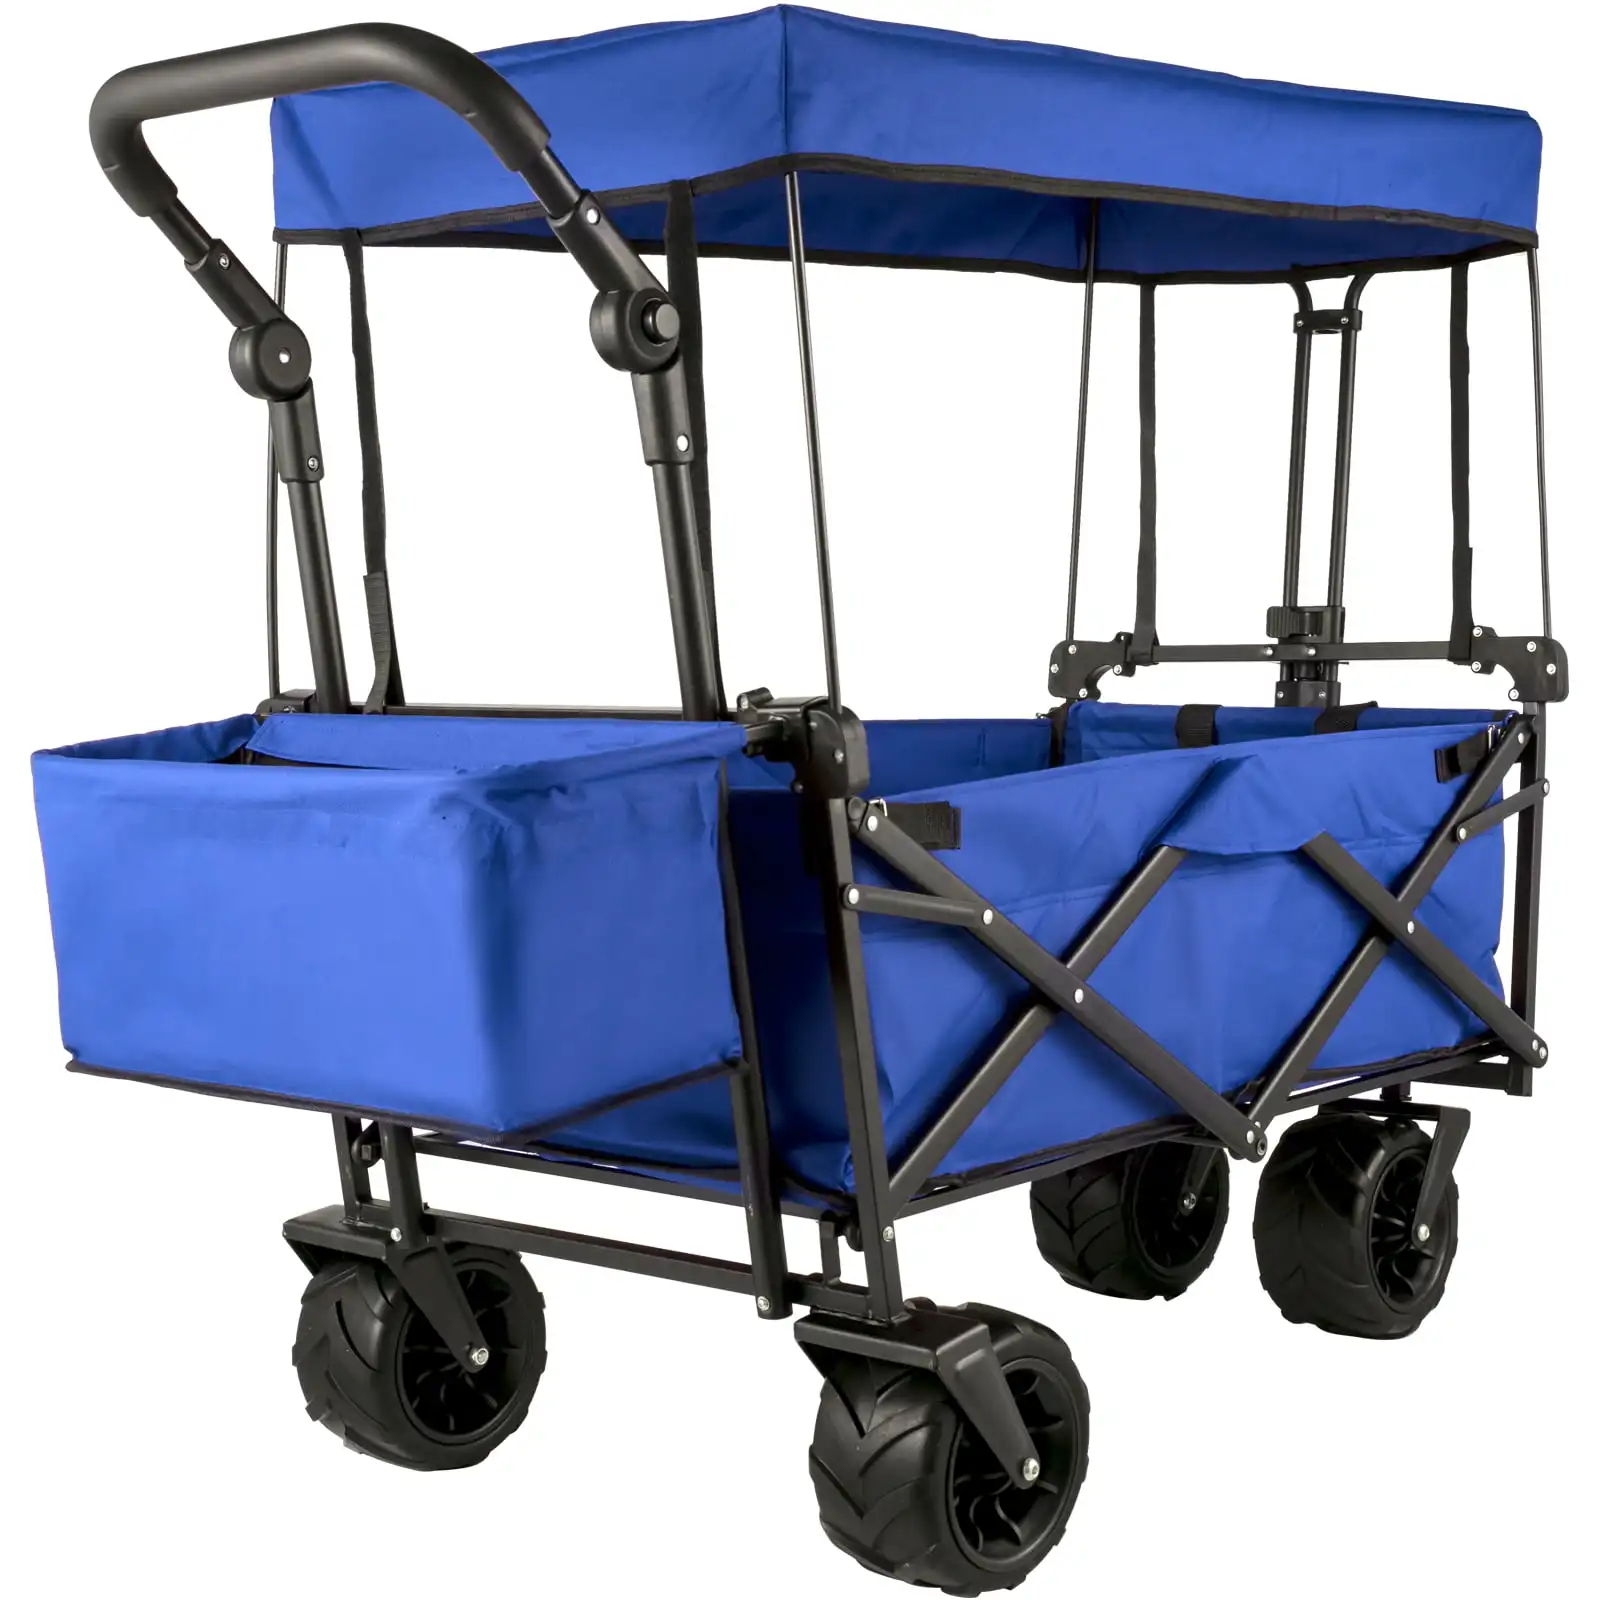 Collapsible Wagon Cart Blue, Foldable Wagon Cart Removable Canopy 600D Oxford Cloth, Collapsible Wagon Oversized Wheels,